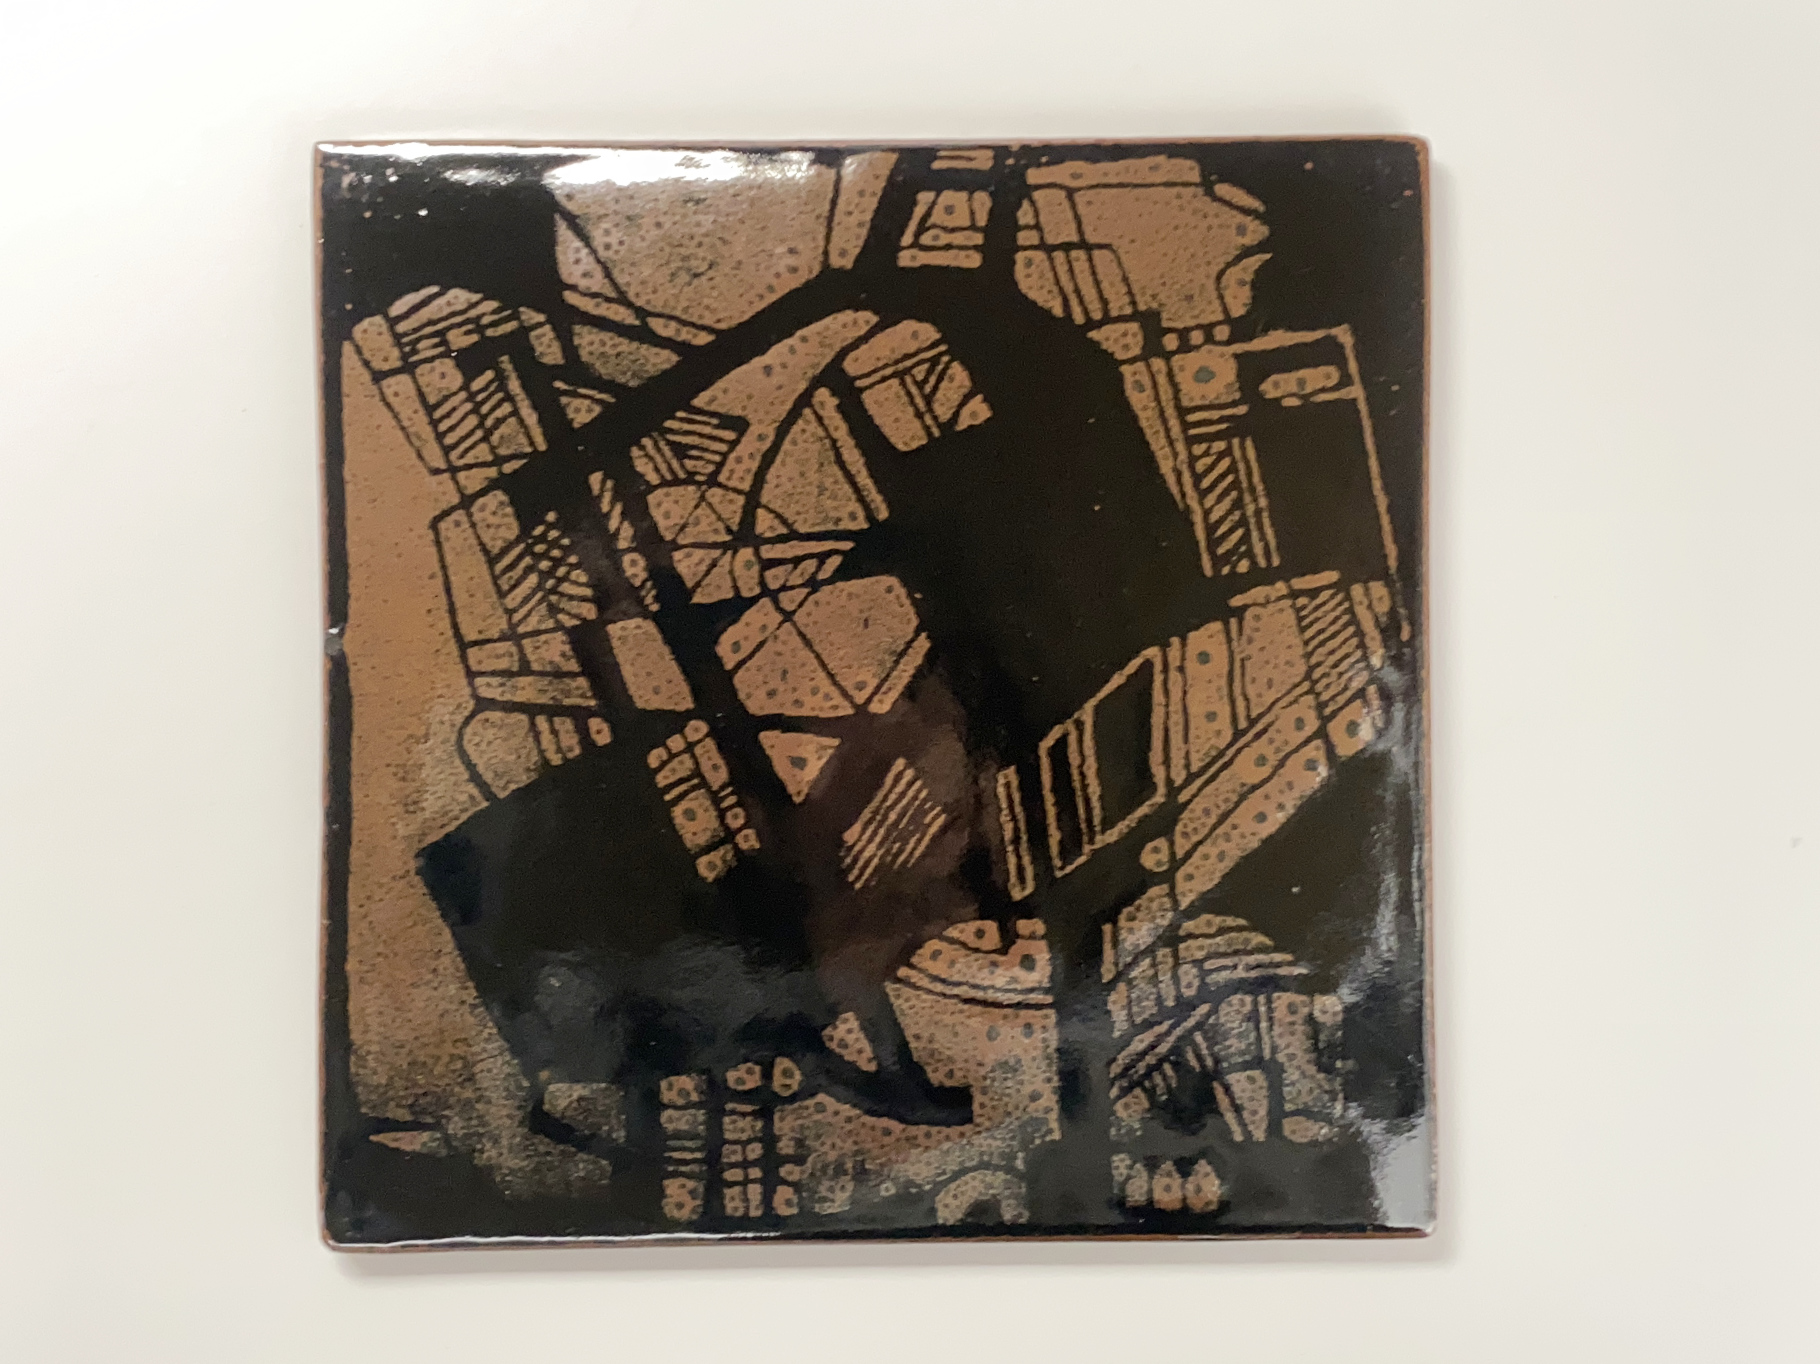 Wall-Plate, Ceramic, Porcelain, Unique Piece, abstract Painting with Wax on black Glaze, matte black Glaze on top, by Wilhelm & Elly Kuch, 2006